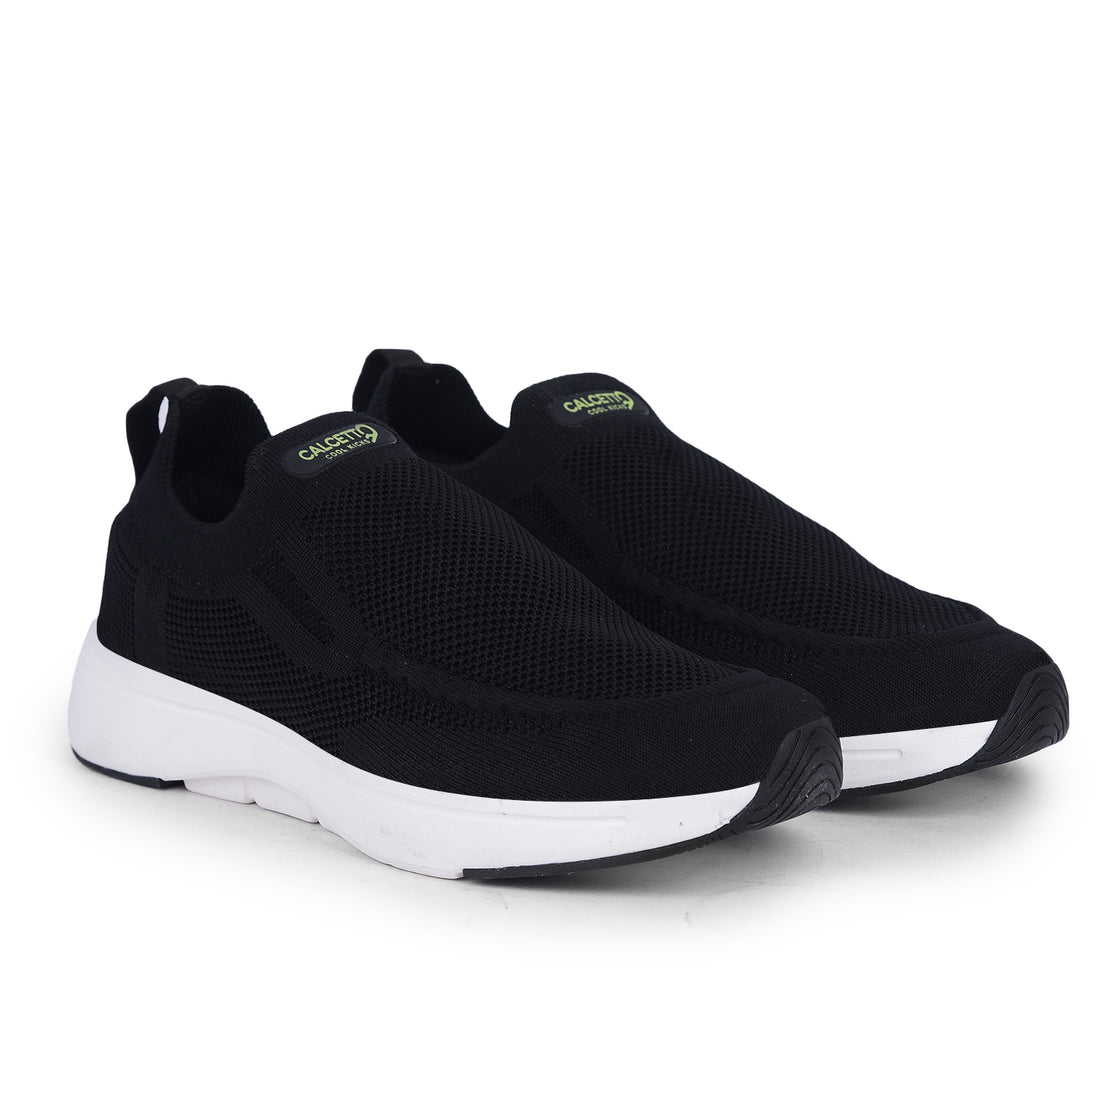 Calcetto CLT-2053 BLACK Men Running Sports Shoes